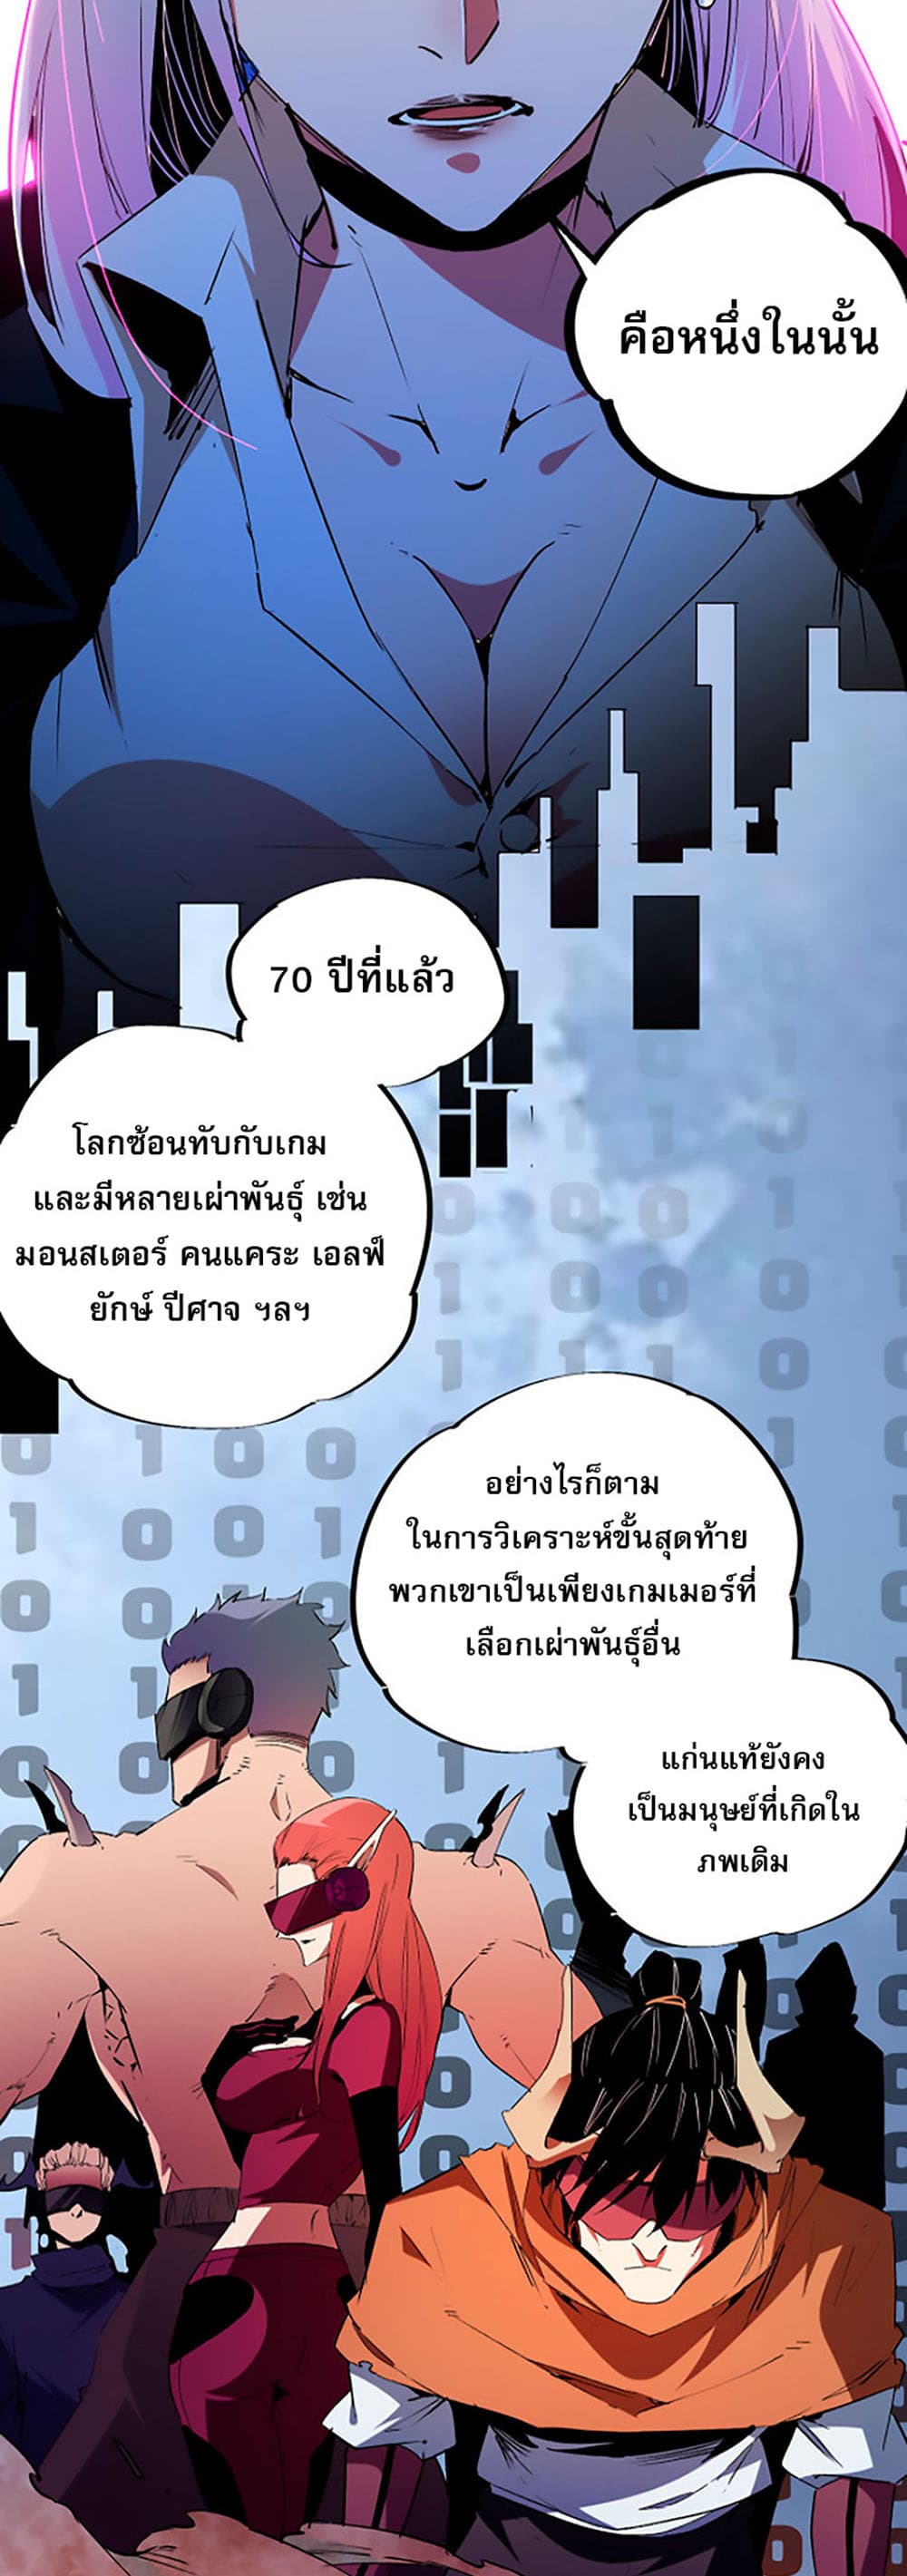 Job Changing for the Entire Population: The Jobless Me Will Terminate the Gods ฉันคือผู้เล่นไร้อาชีพที่สังหารเหล่าเทพ 20-20